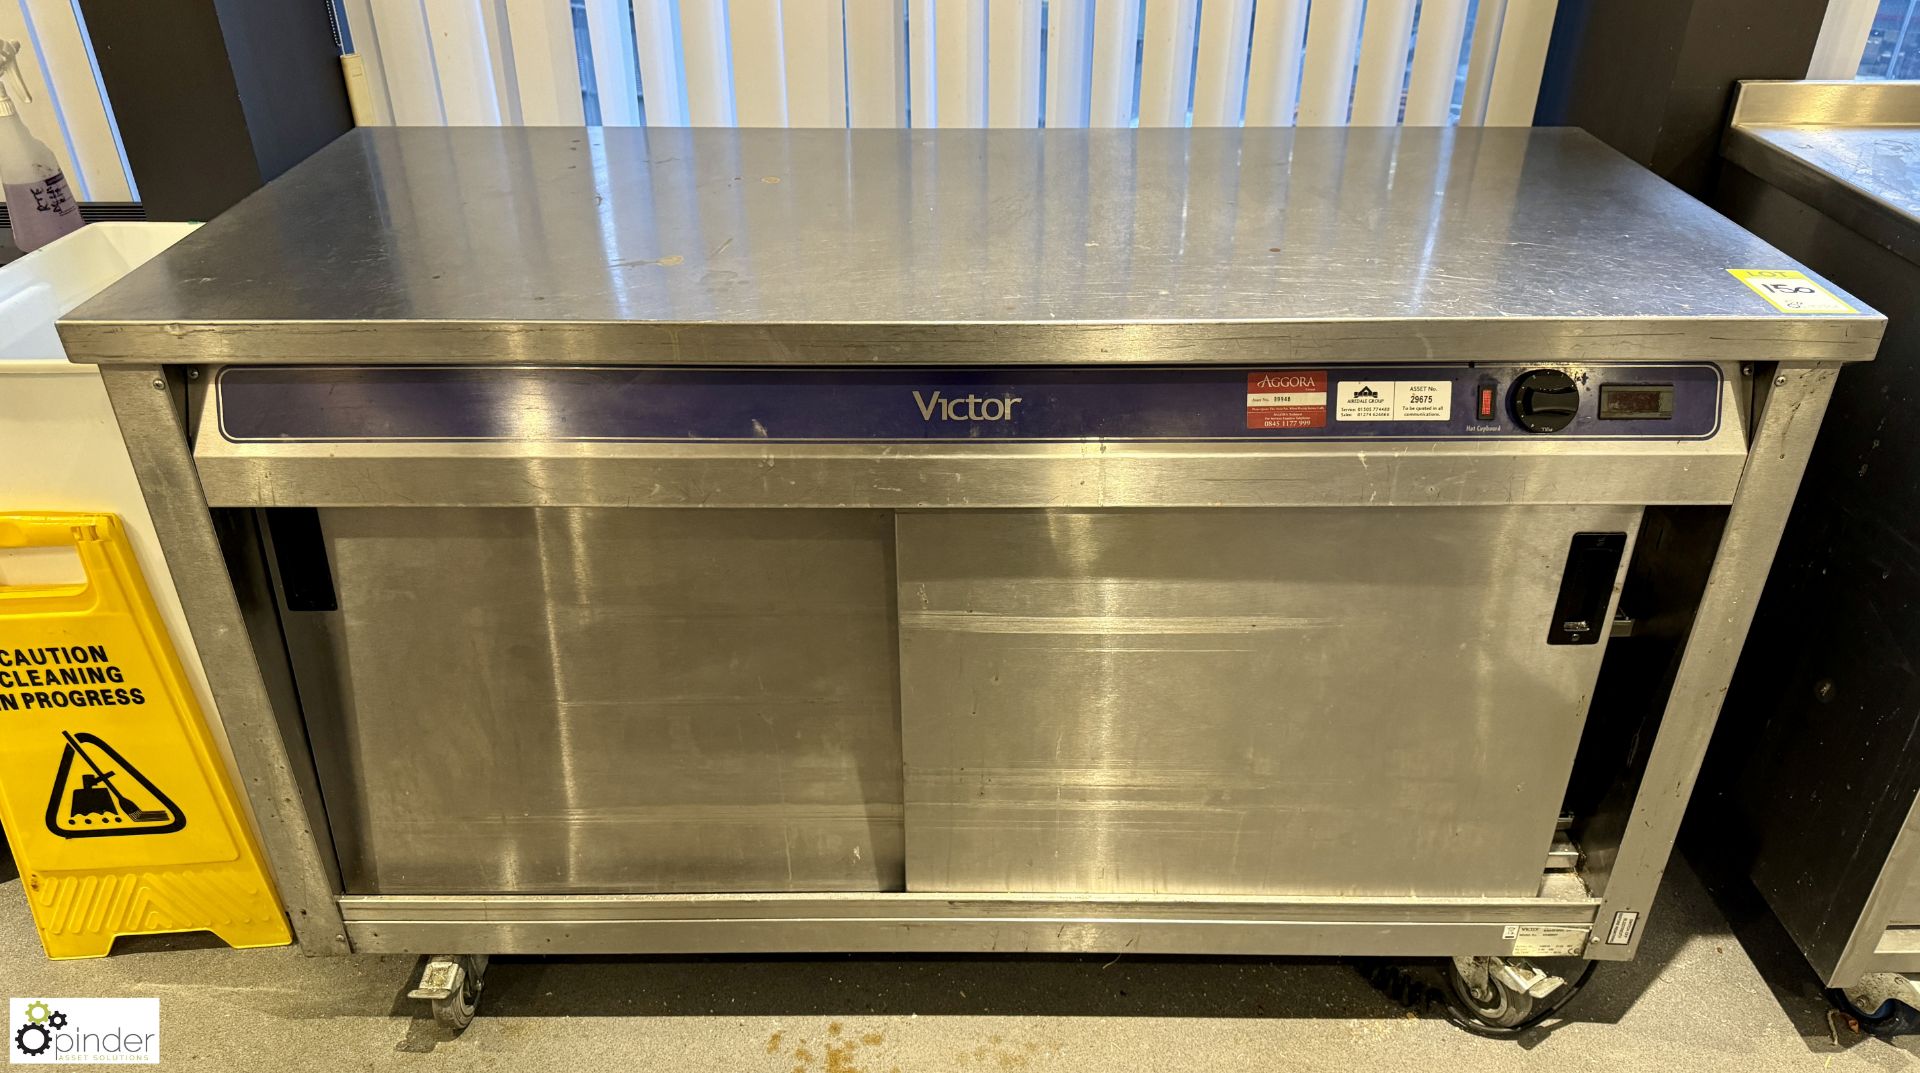 Victor stainless steel mobile twin door Heated Cabinet, 240volts, 1530mm x 670mm x 900mm (location